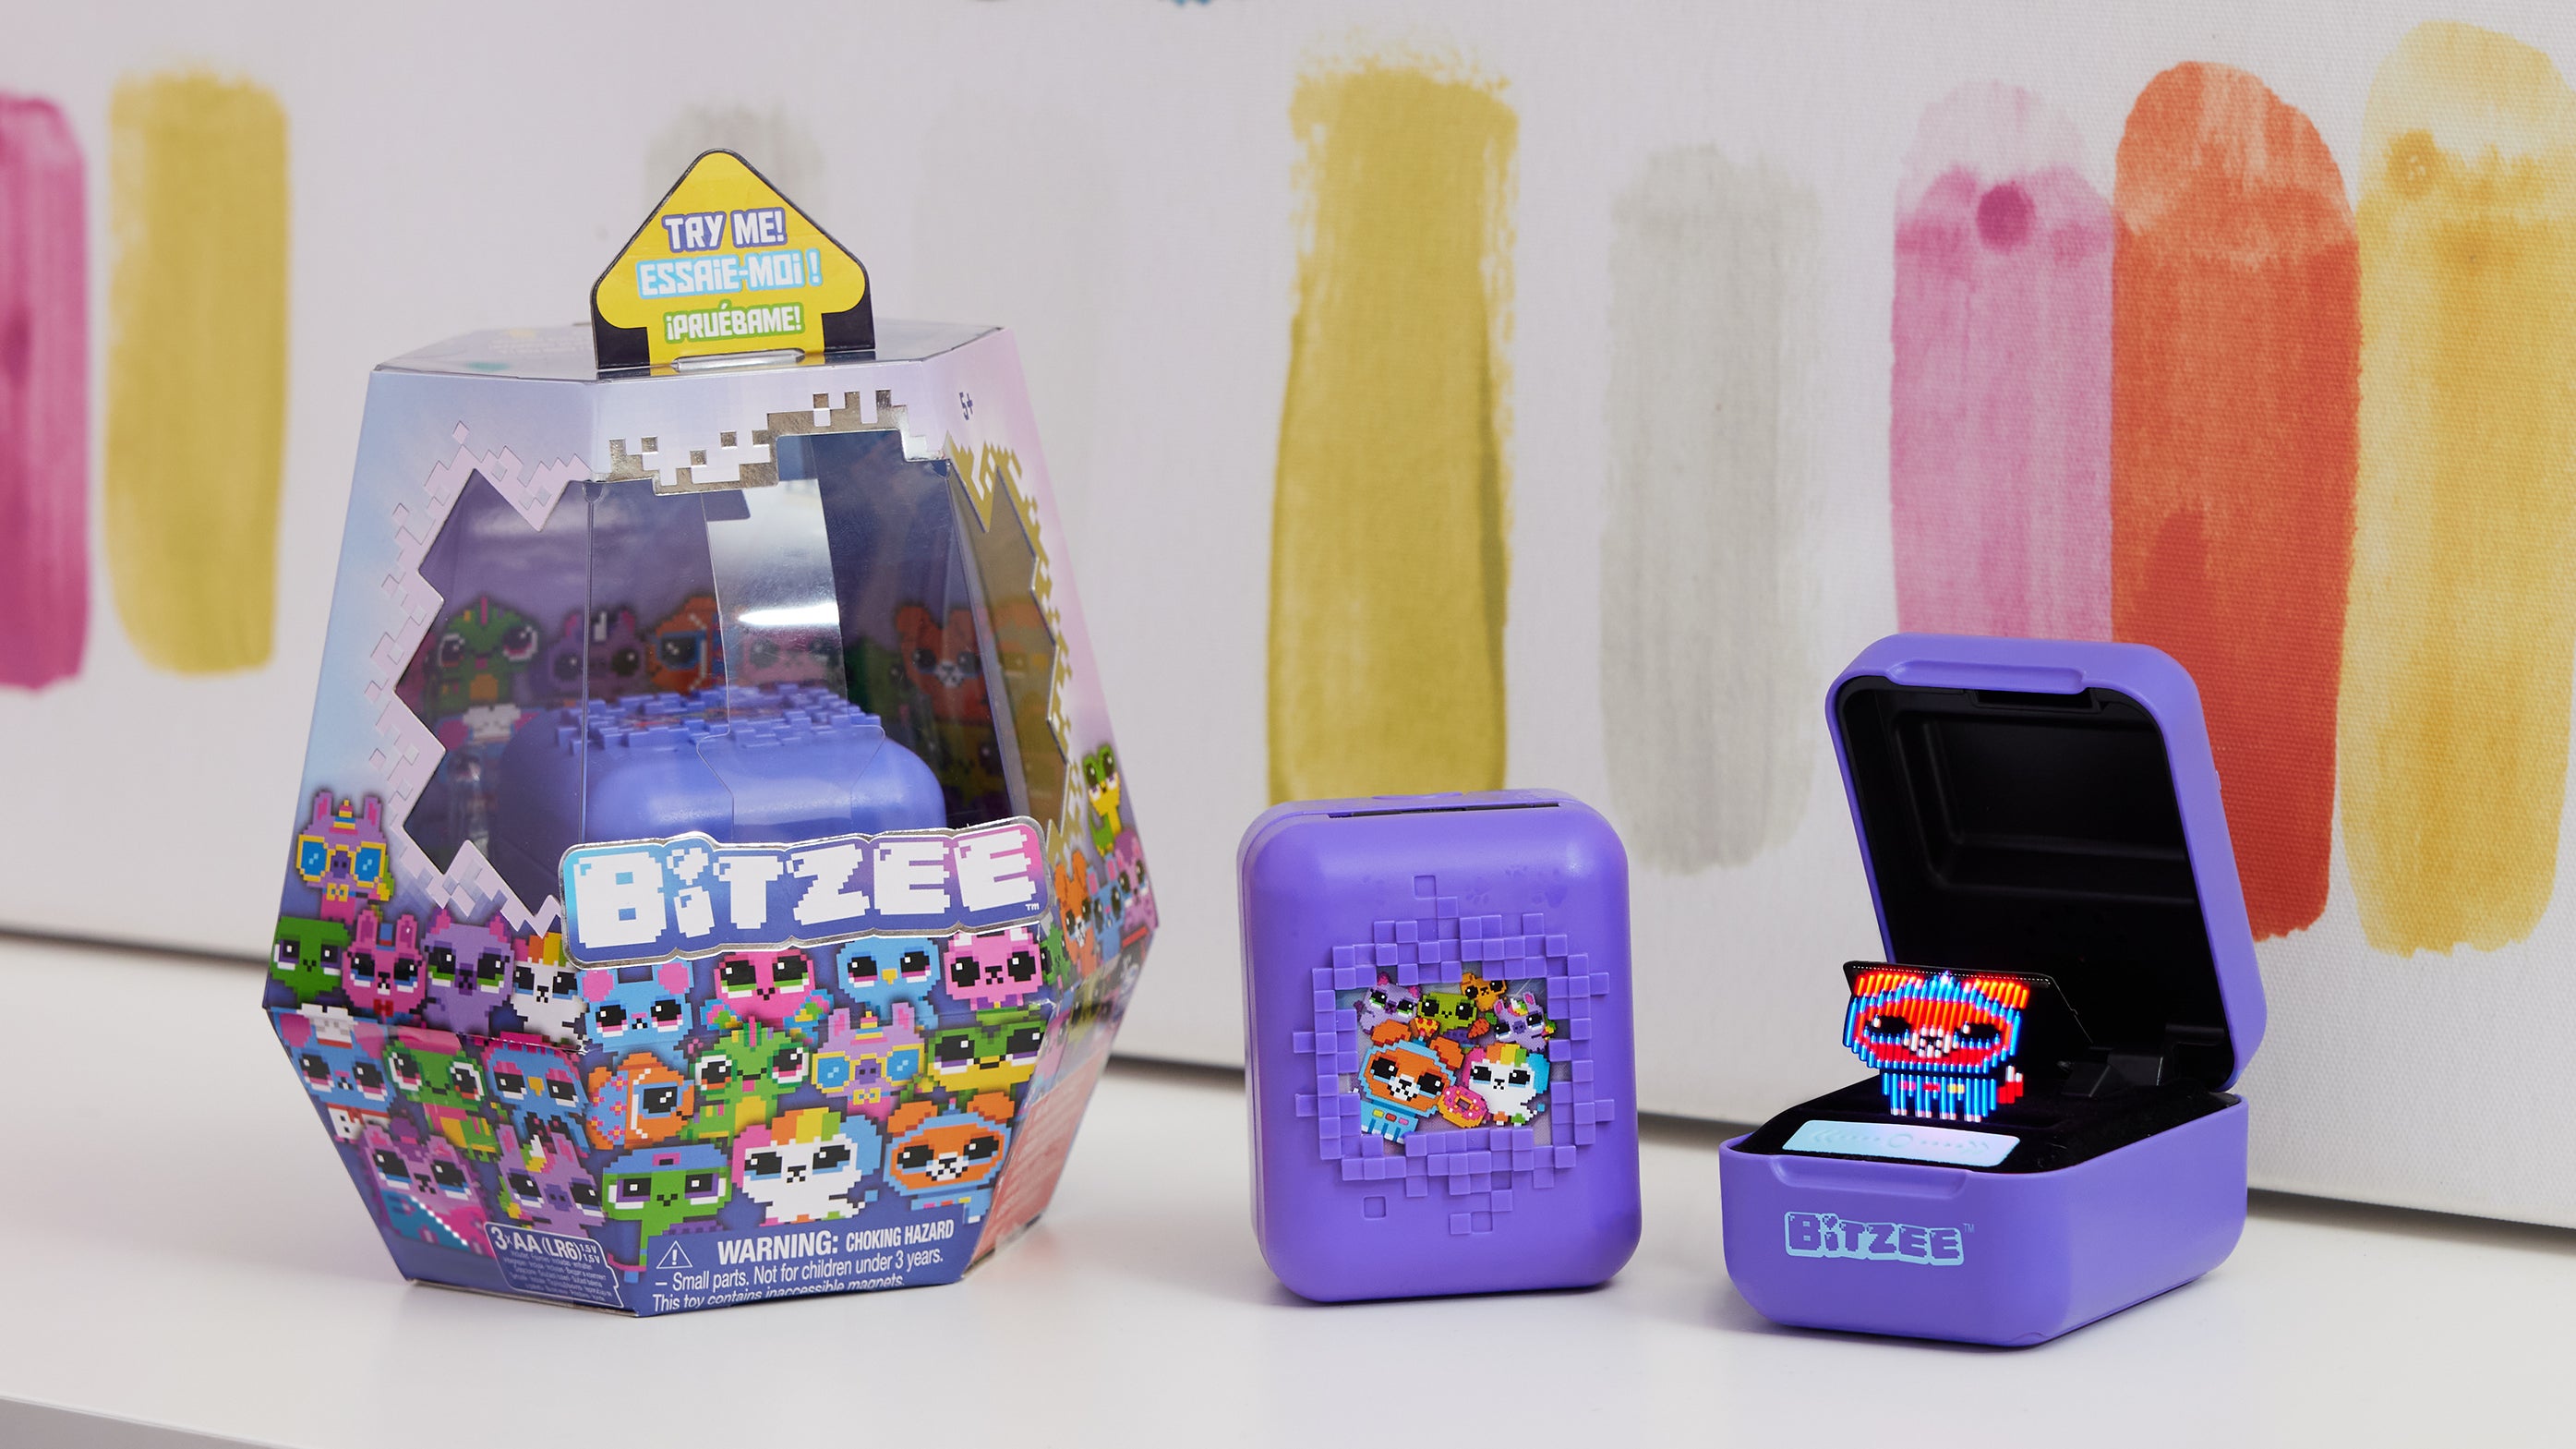 The Bitzee's retail packaging allows the toy's lid to be opened to see its unique display technology in action. (Image: Spin Master)